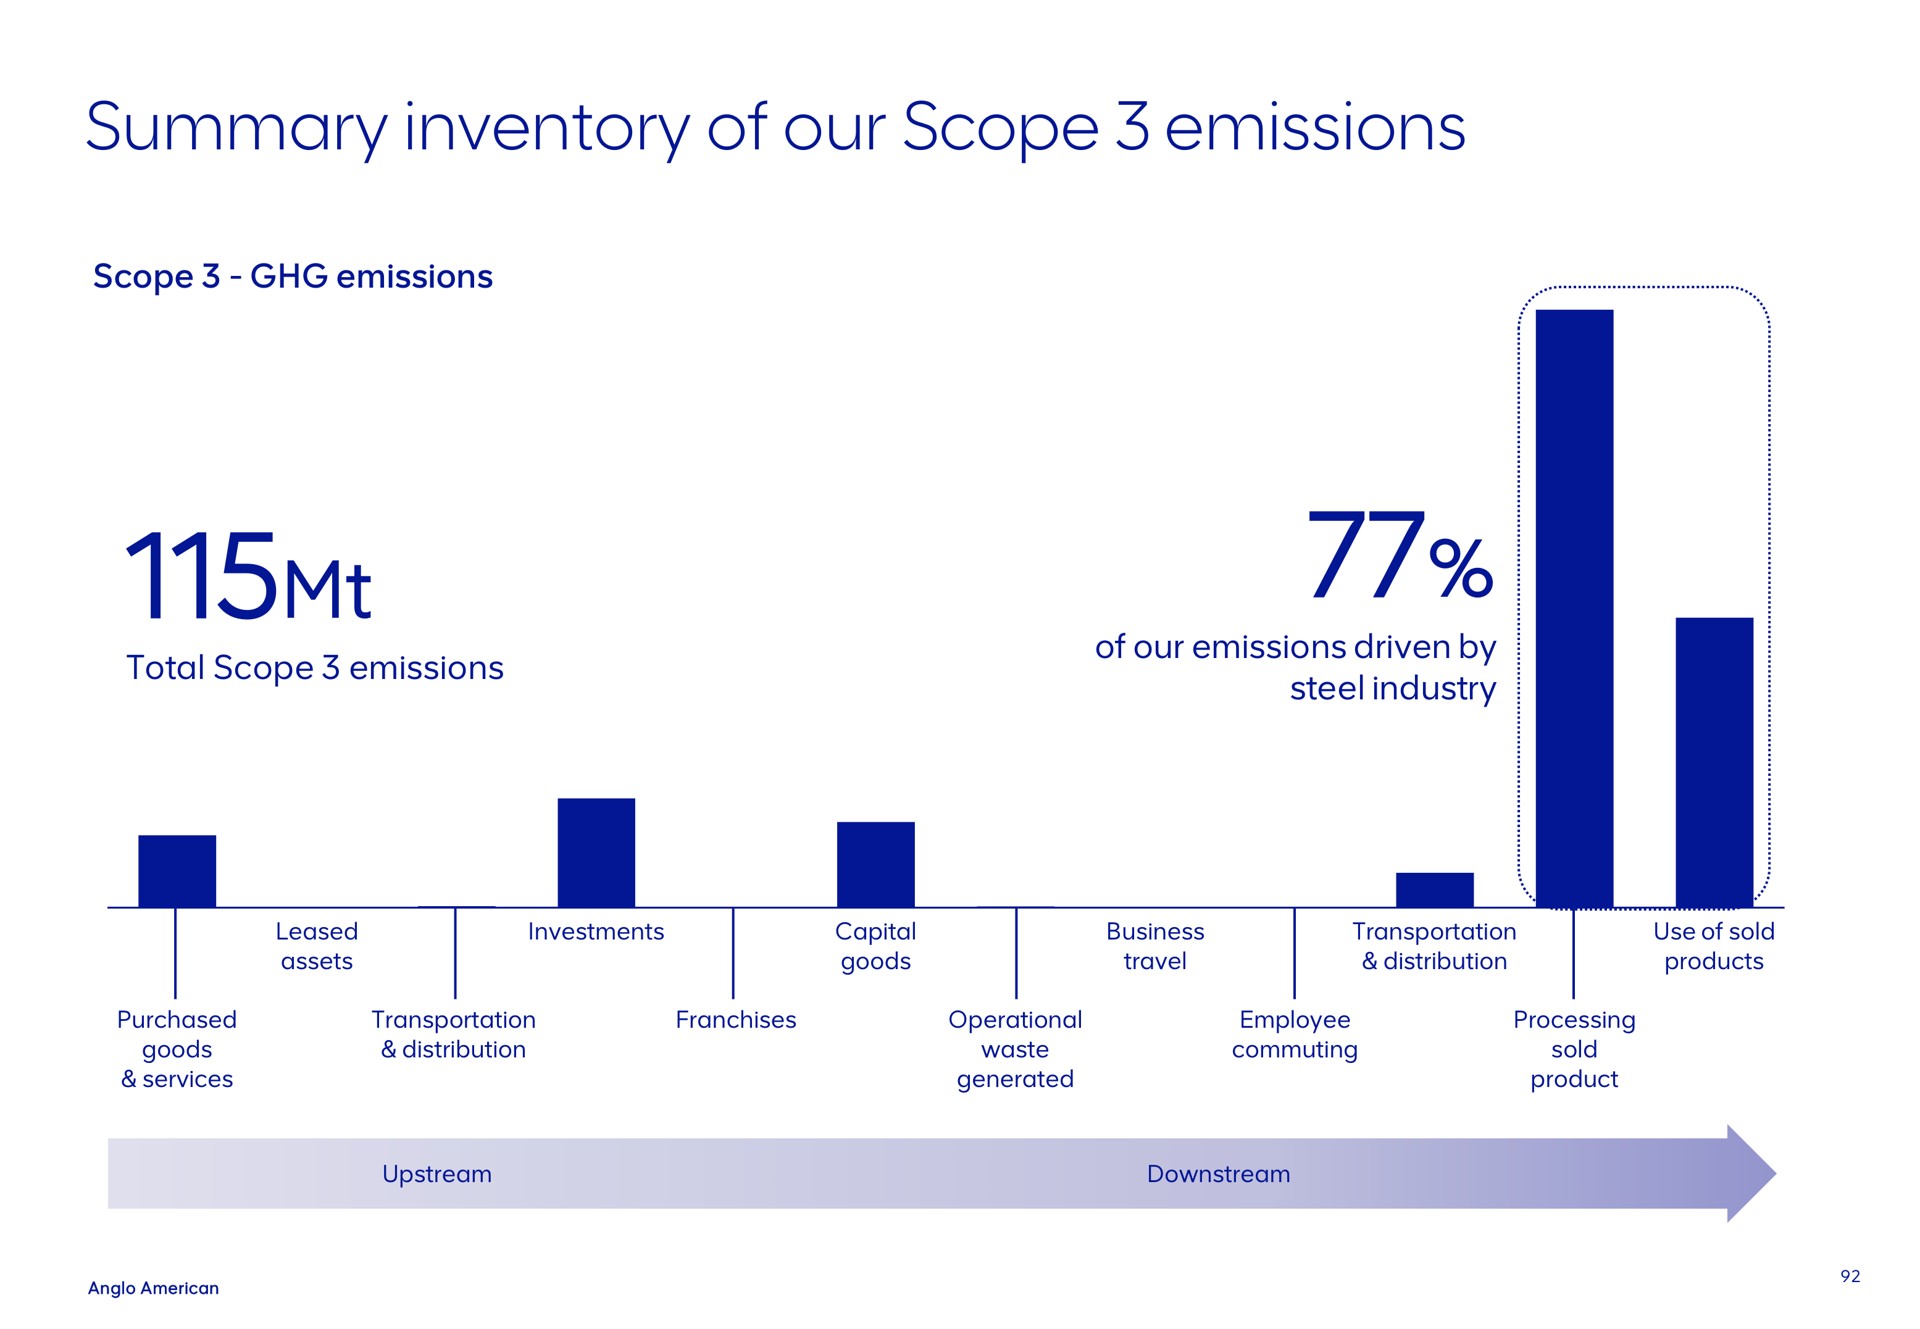 summary inventory of our scope emissions total driven by steel industry leased assets investments capital goods business travel transportation distribution use sold products purchased goods services transportation distribution franchises operational waste generated employee commuting processing sold product upstream downstream | AngloAmerican